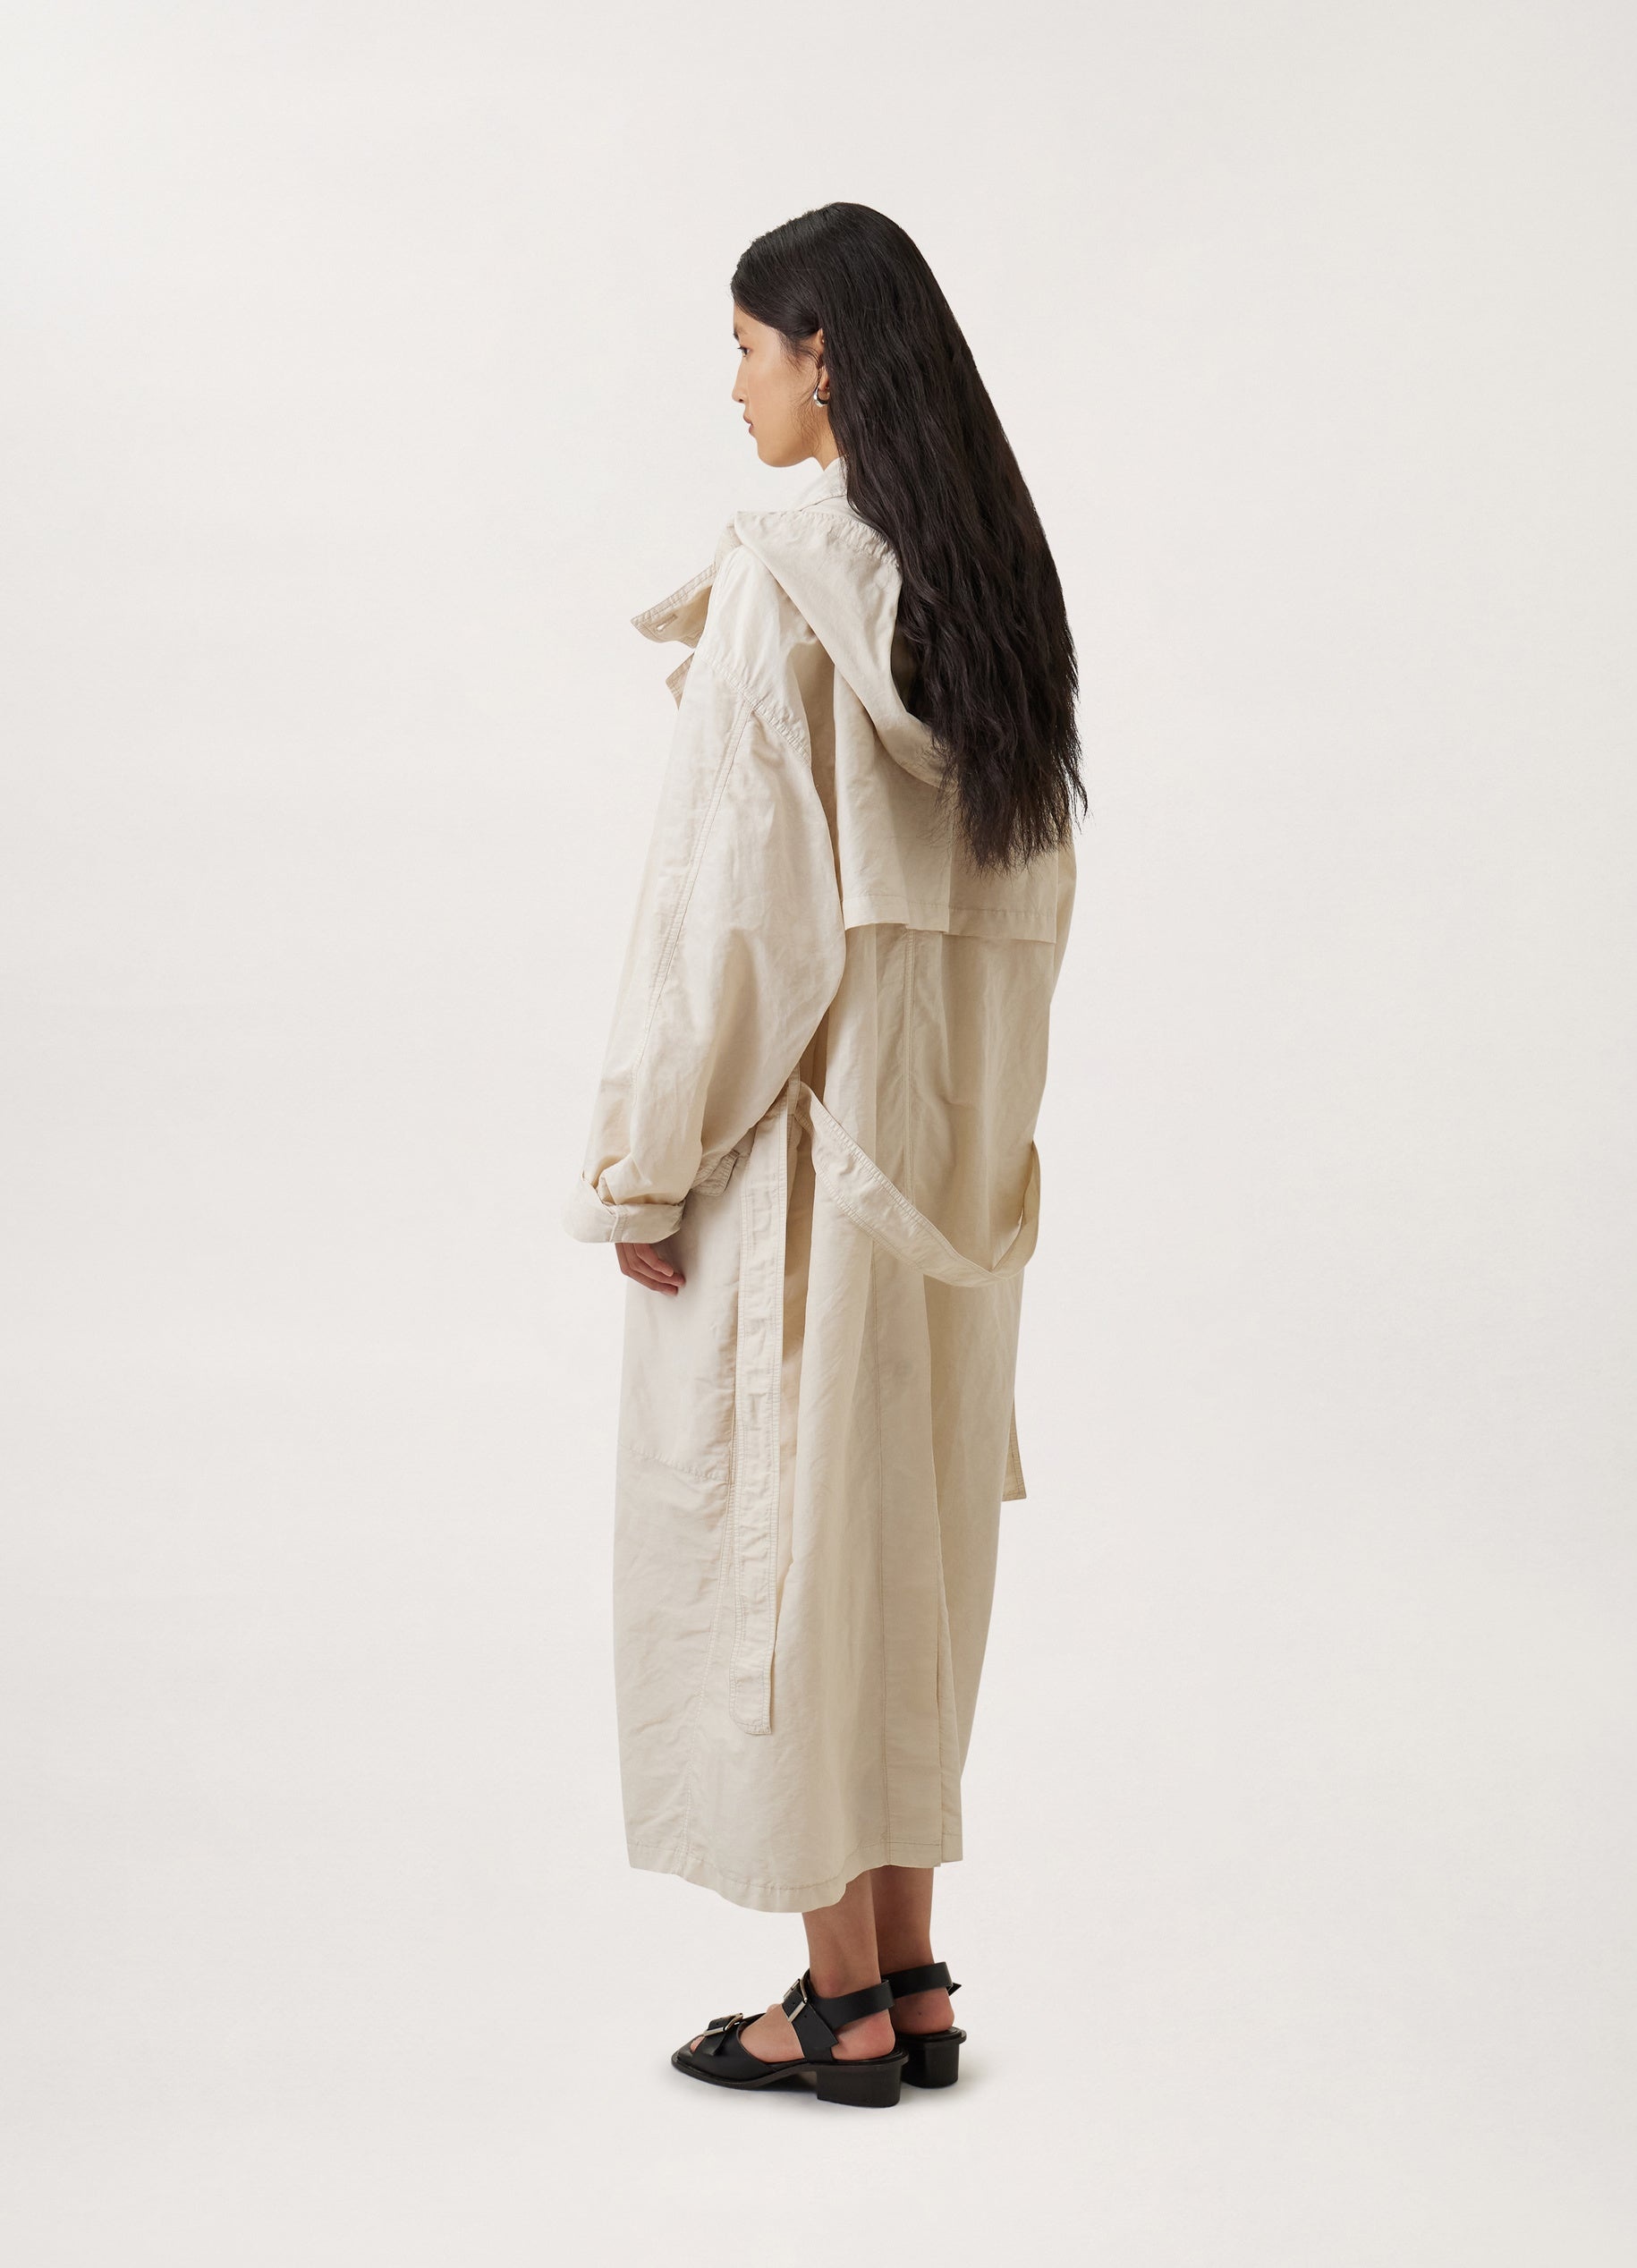 HOODED DOUBLE BREASTED PARKA
POLYAMIDE LINEN COTTON - 8